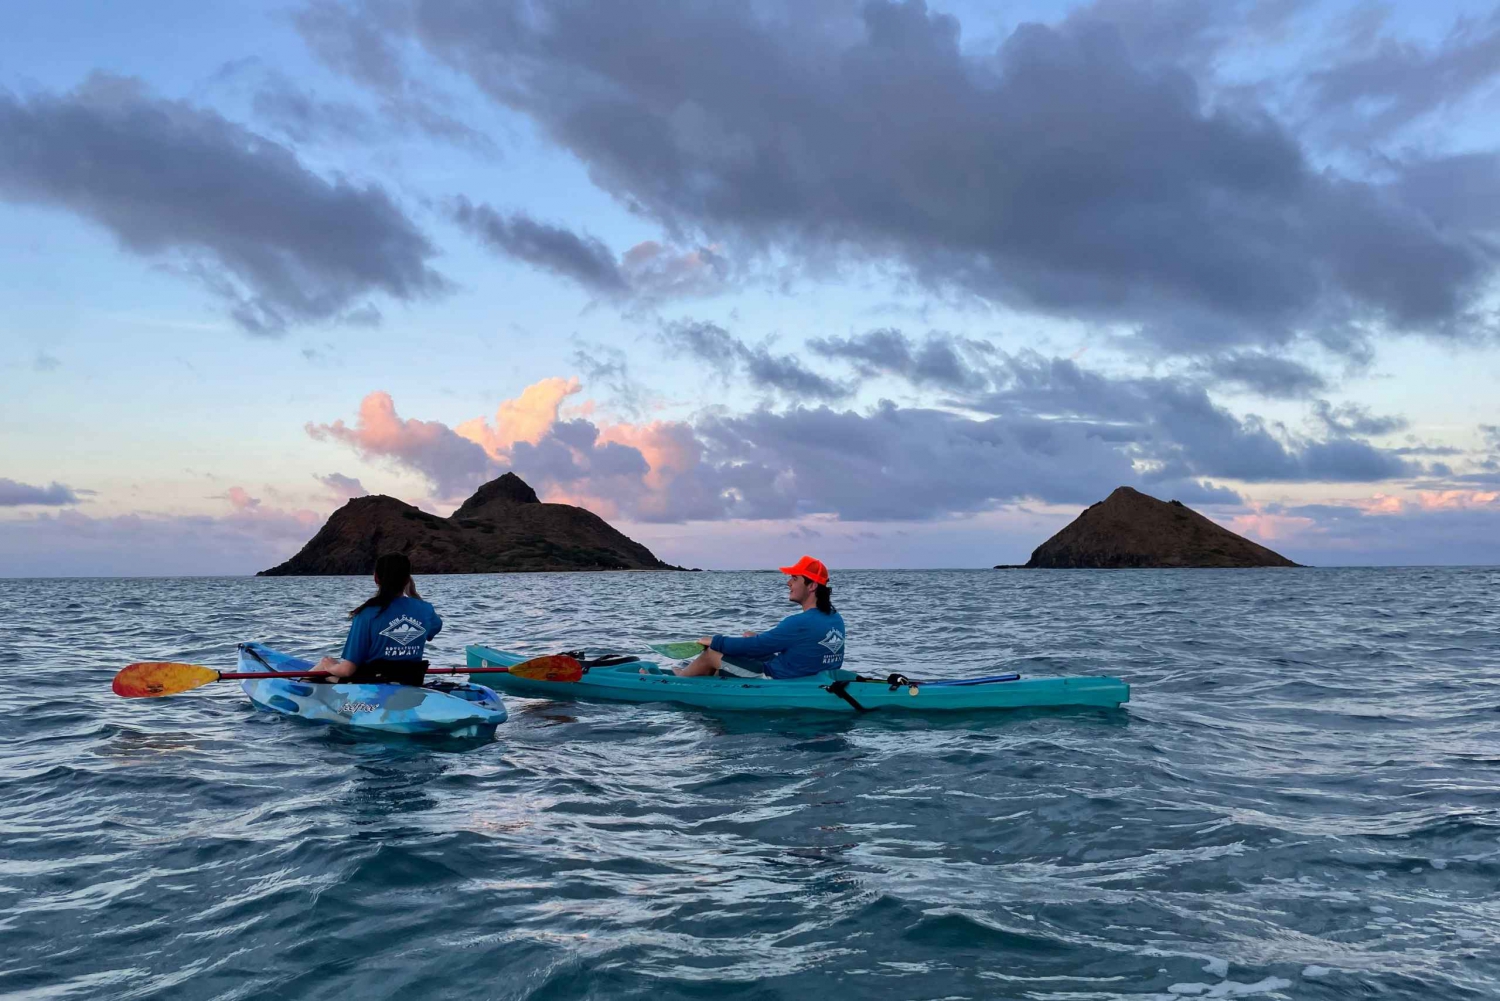 Kailua: Guided Kayak Tour to Popoia Island with Picnic Lunch